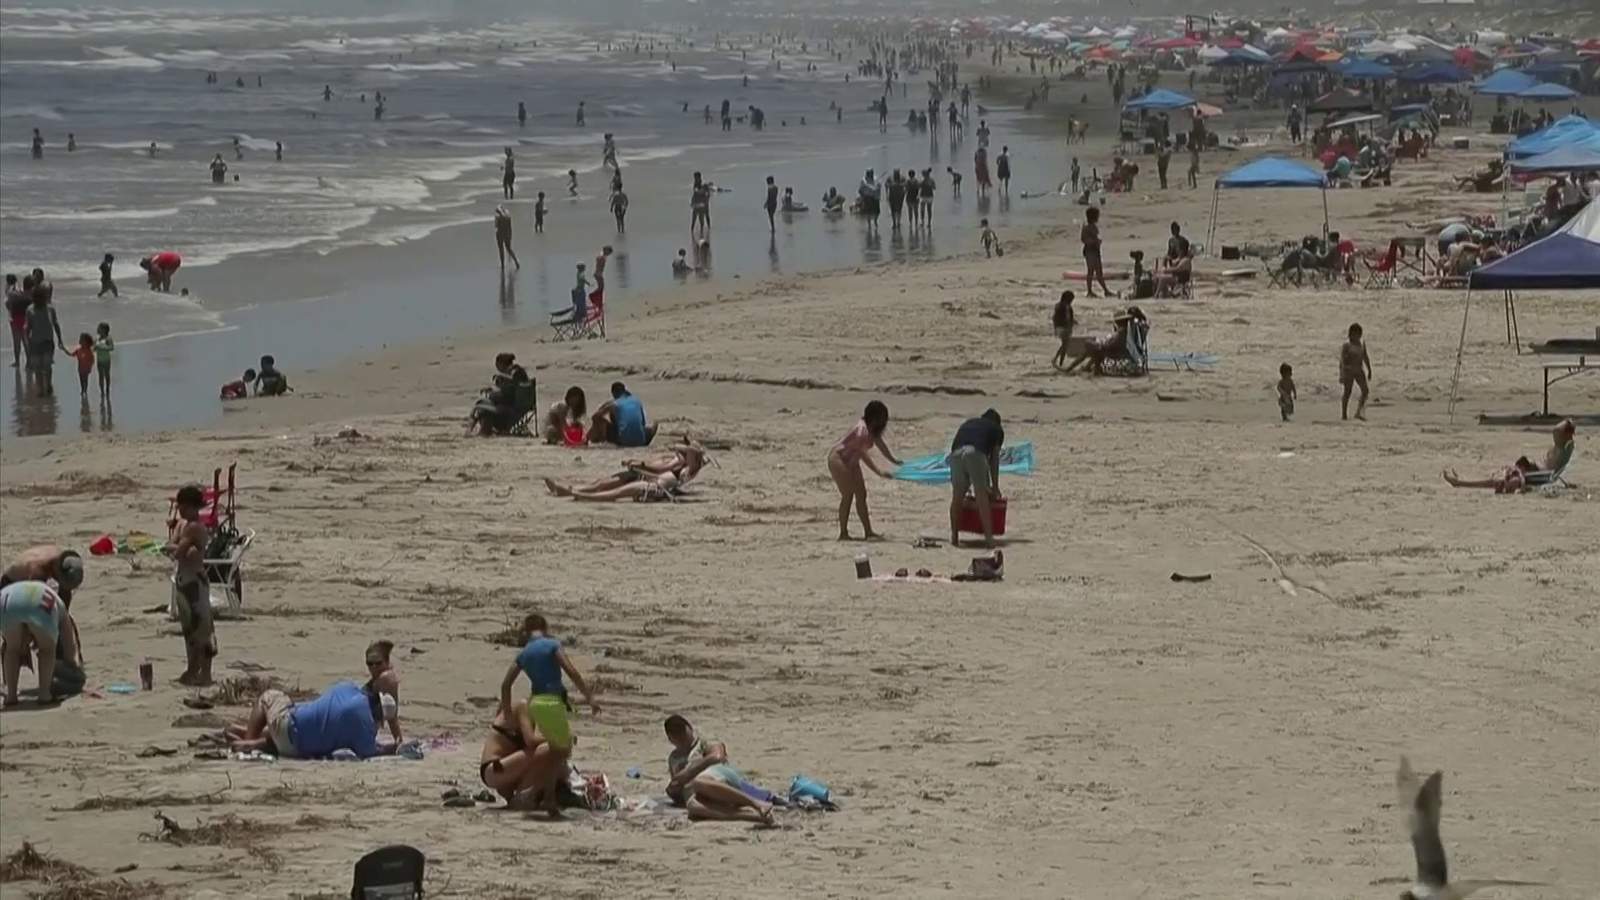 As beachgoers pack Port Aransas for Memorial Day, U.S. officials say to heed social distancing rules